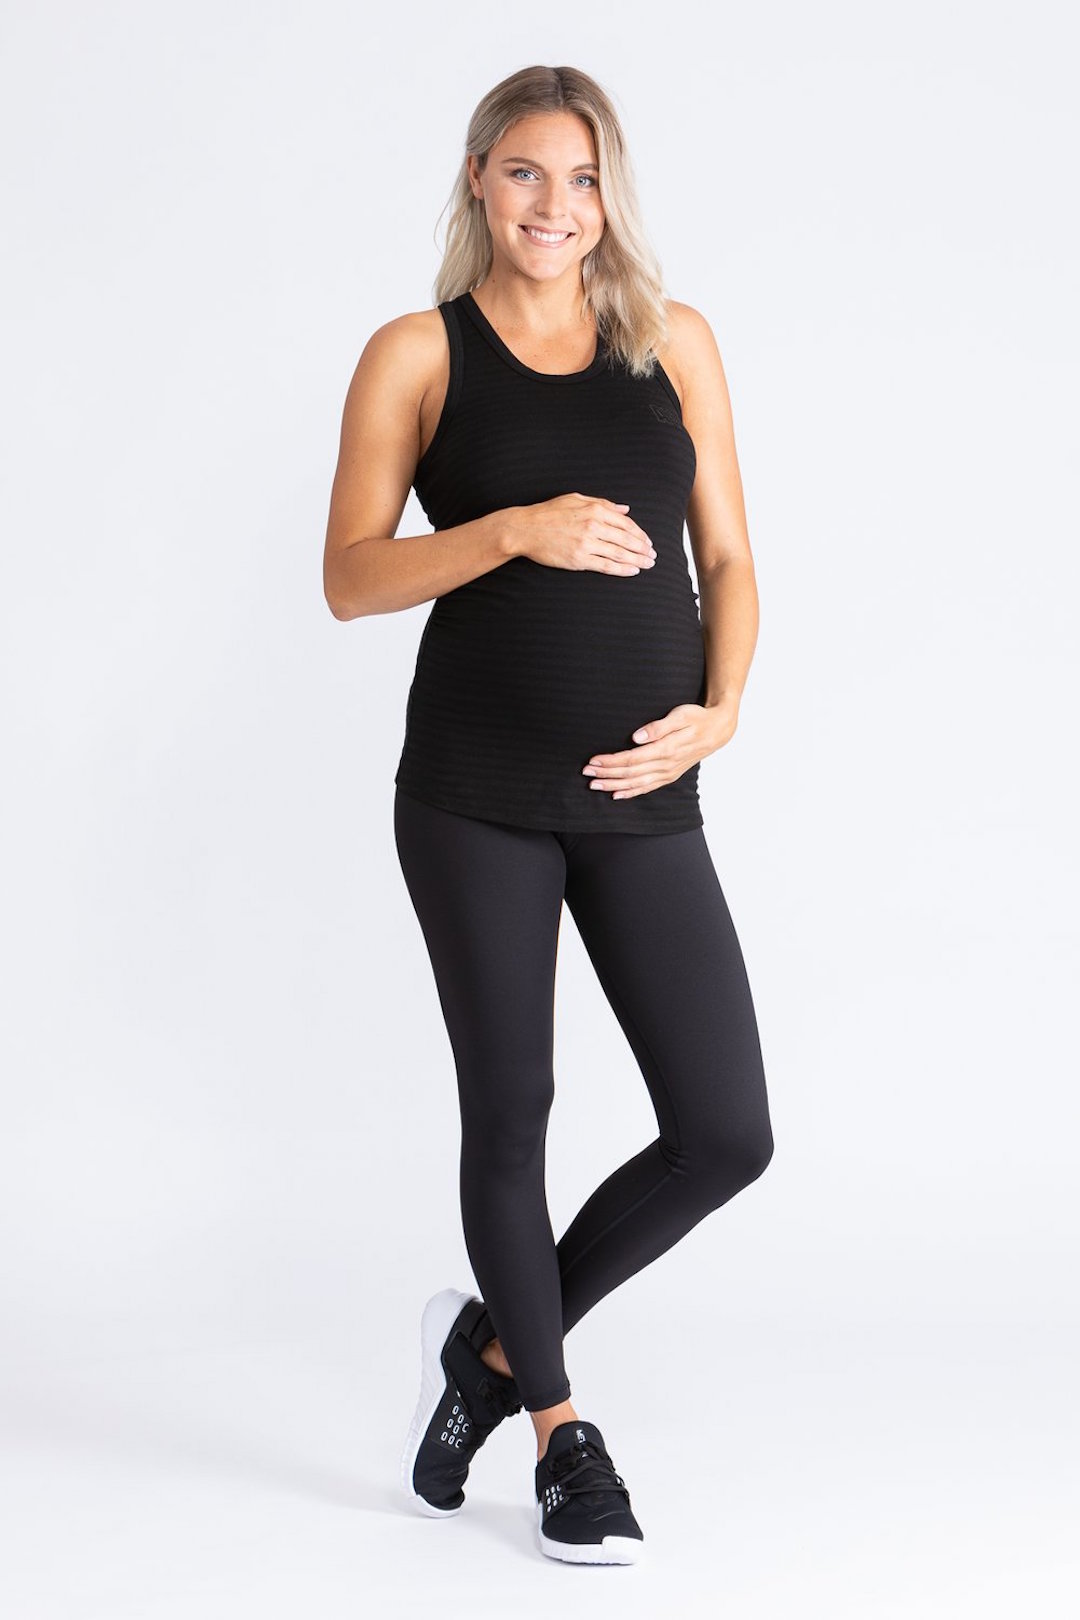 A pregnant woman wears a black singlet top and black tights.